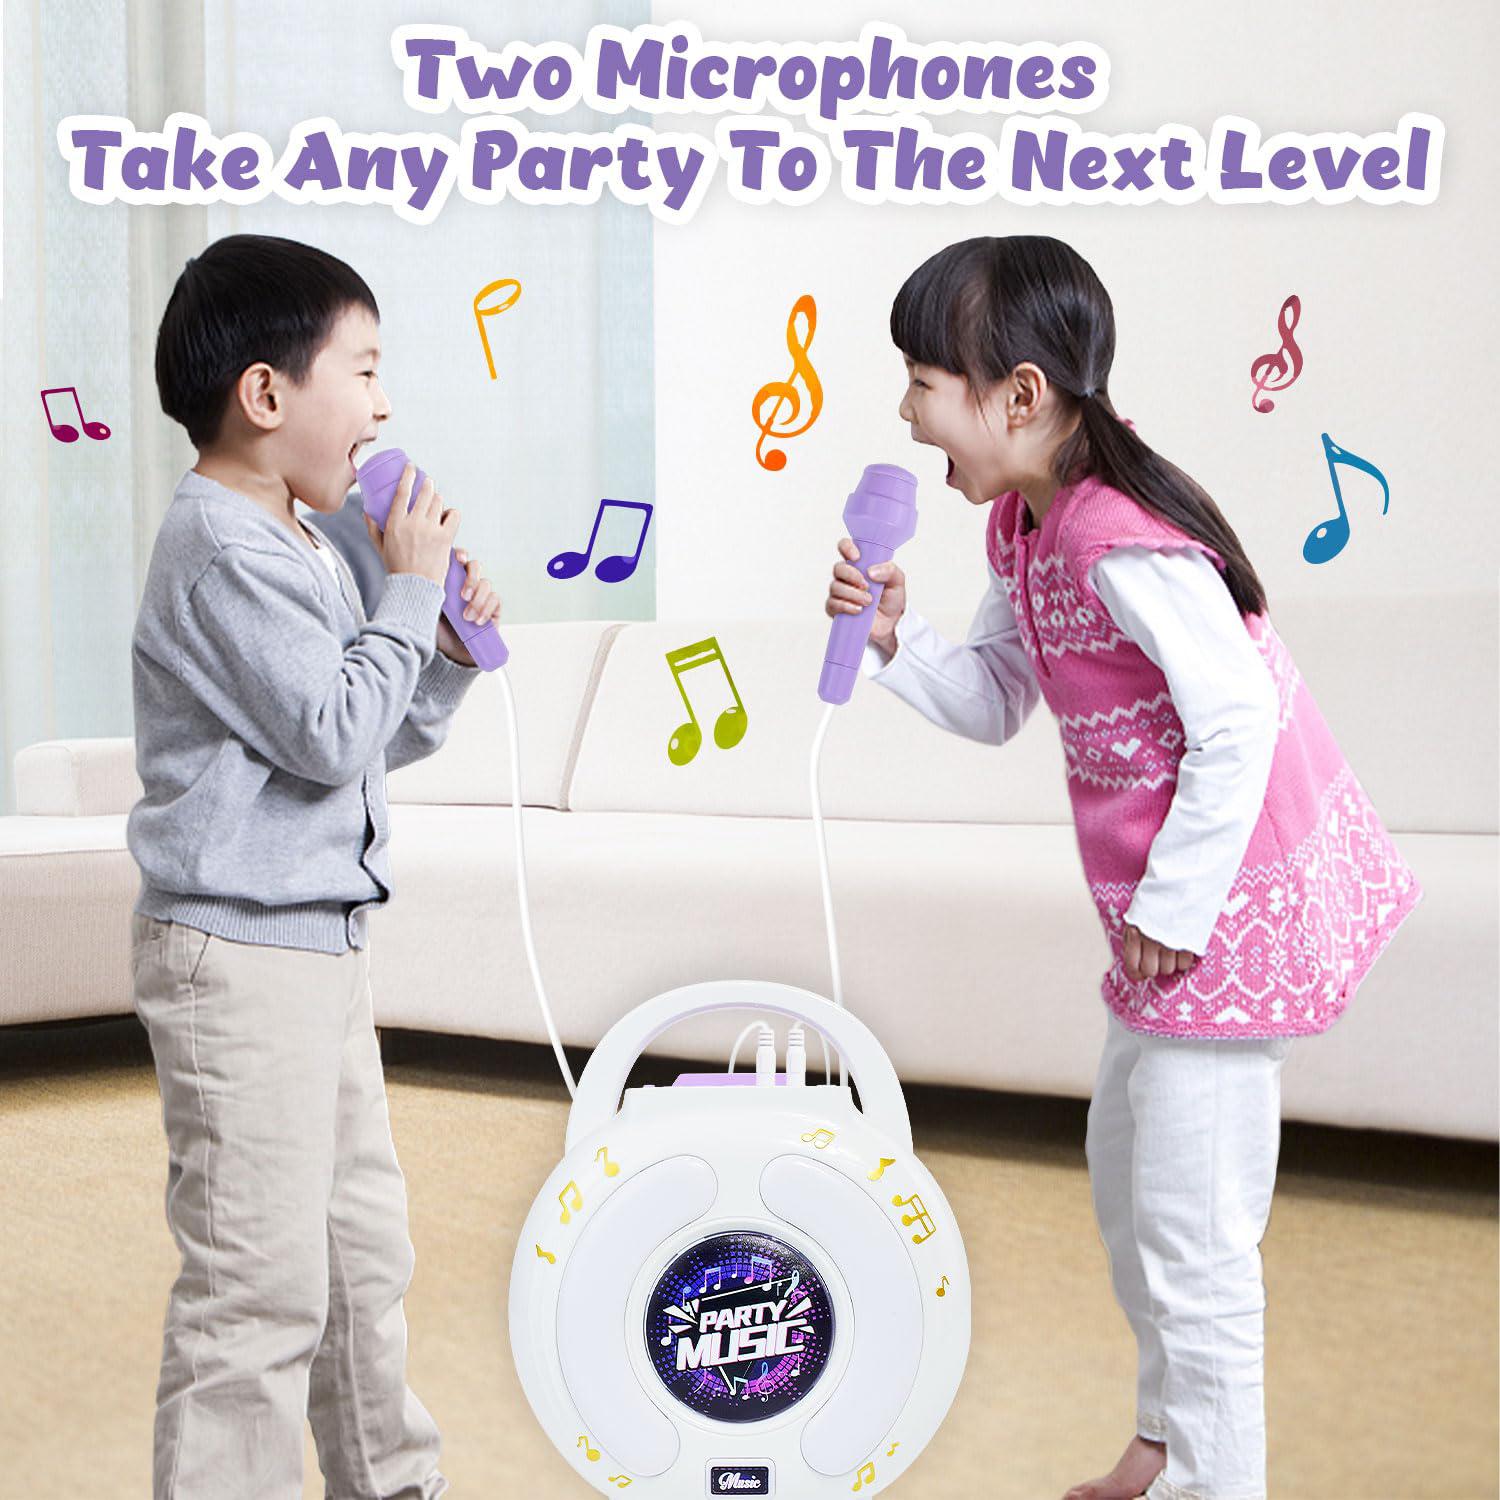 bakam karaoke machine for kids age 4-12 with 2 microphones, play microphone for kids ages 3-5, toddler microphones toy for si